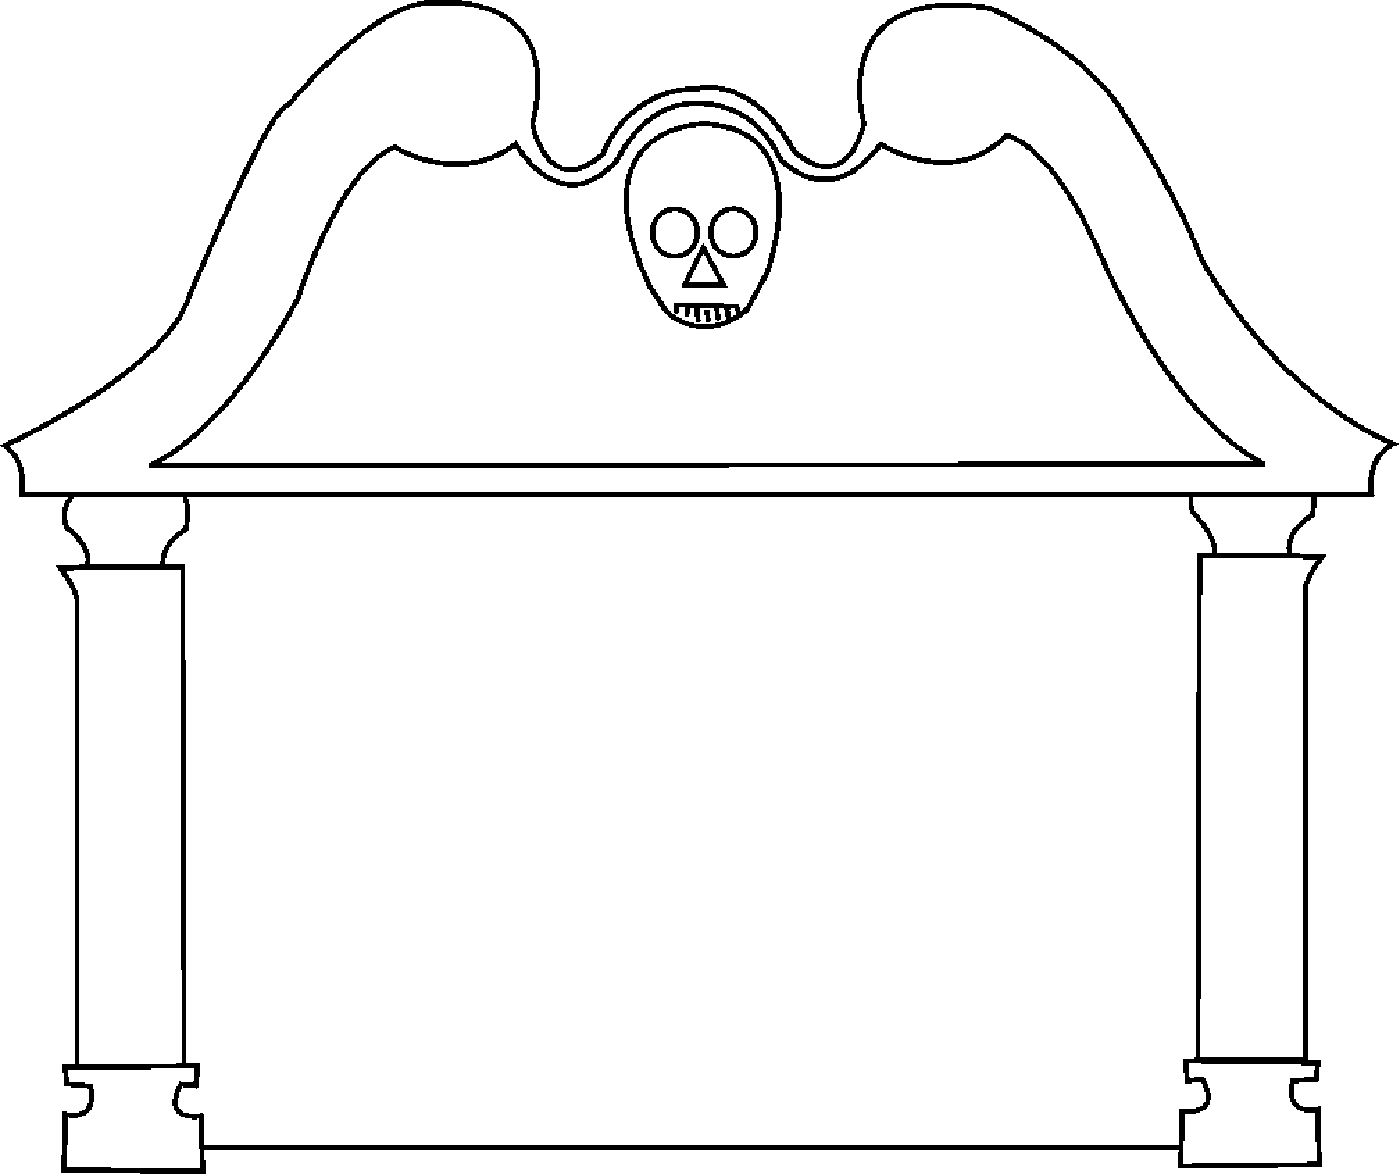 33 Blank Tombstone Template   Free Cliparts That You Can Download To